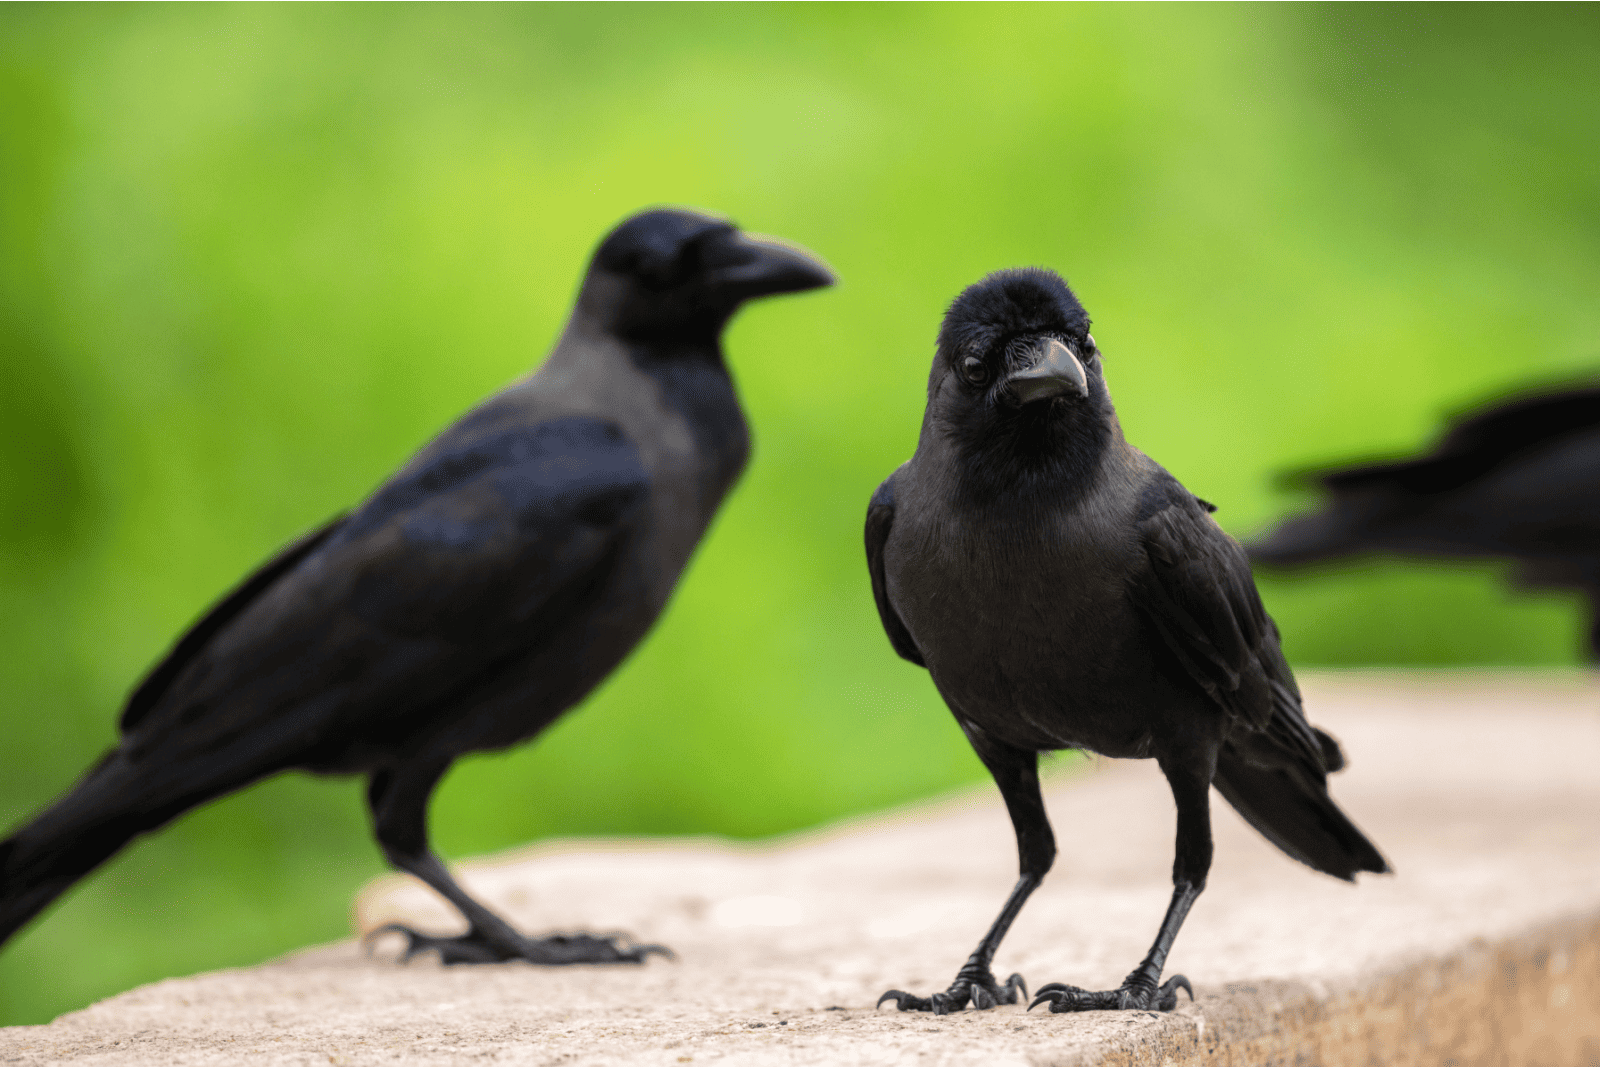 How To Attract Crows To Make Your Garden Pest Free